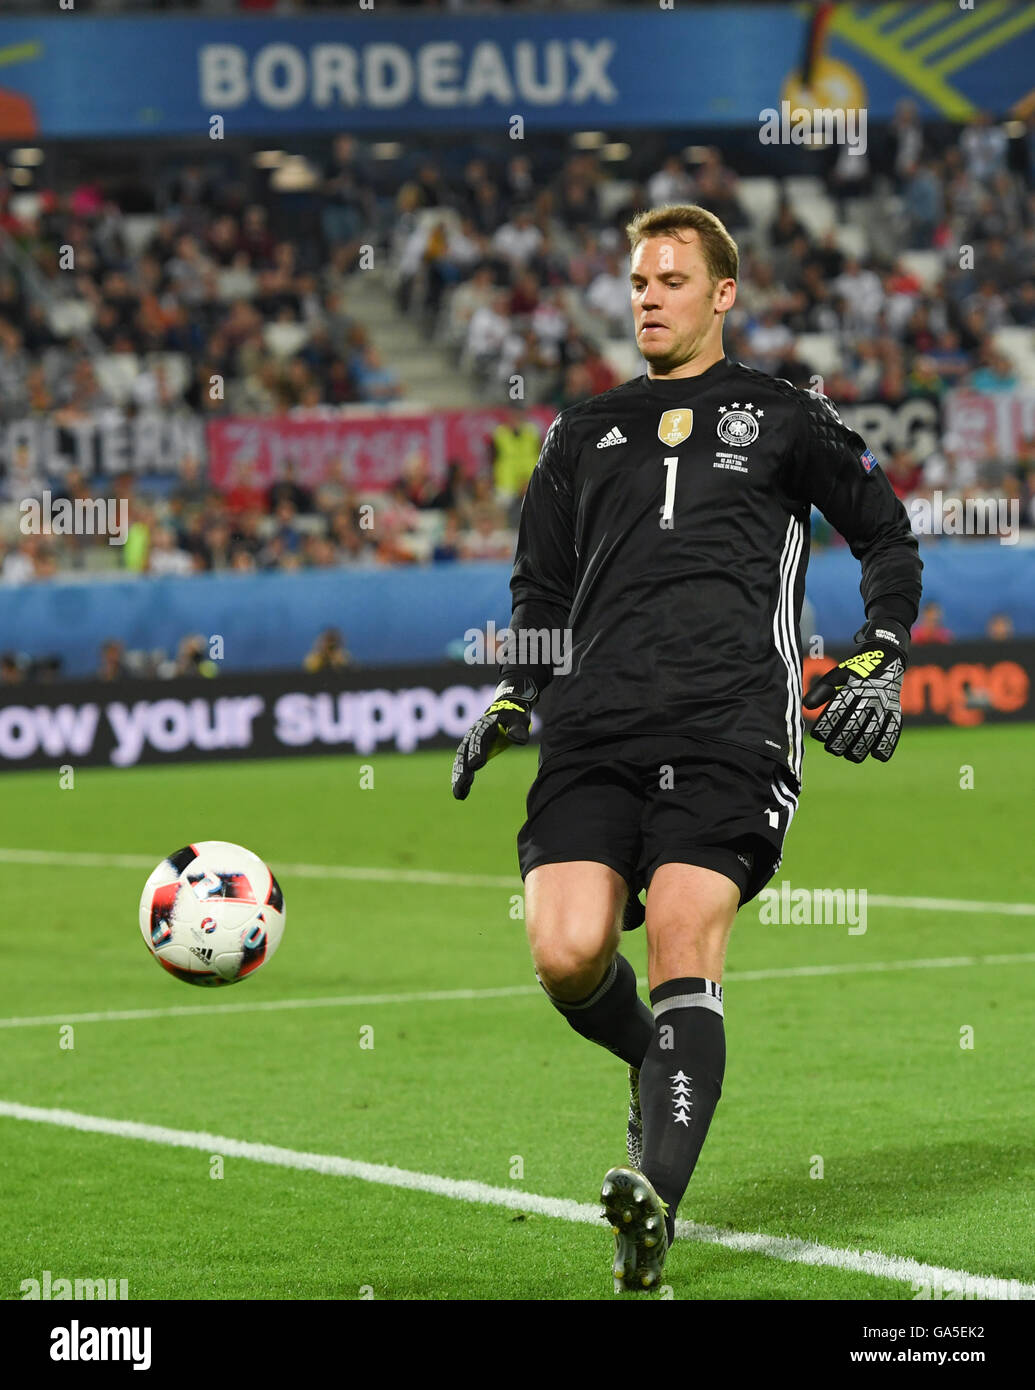 Bordeaux, France. 02nd July, 2016. Germany's goalkeeper Manuel Neuer in  action during the UEFA EURO 2016 quarter final soccer match between Germany  and Italy at the Stade de Bordeaux in Bordeaux, France,